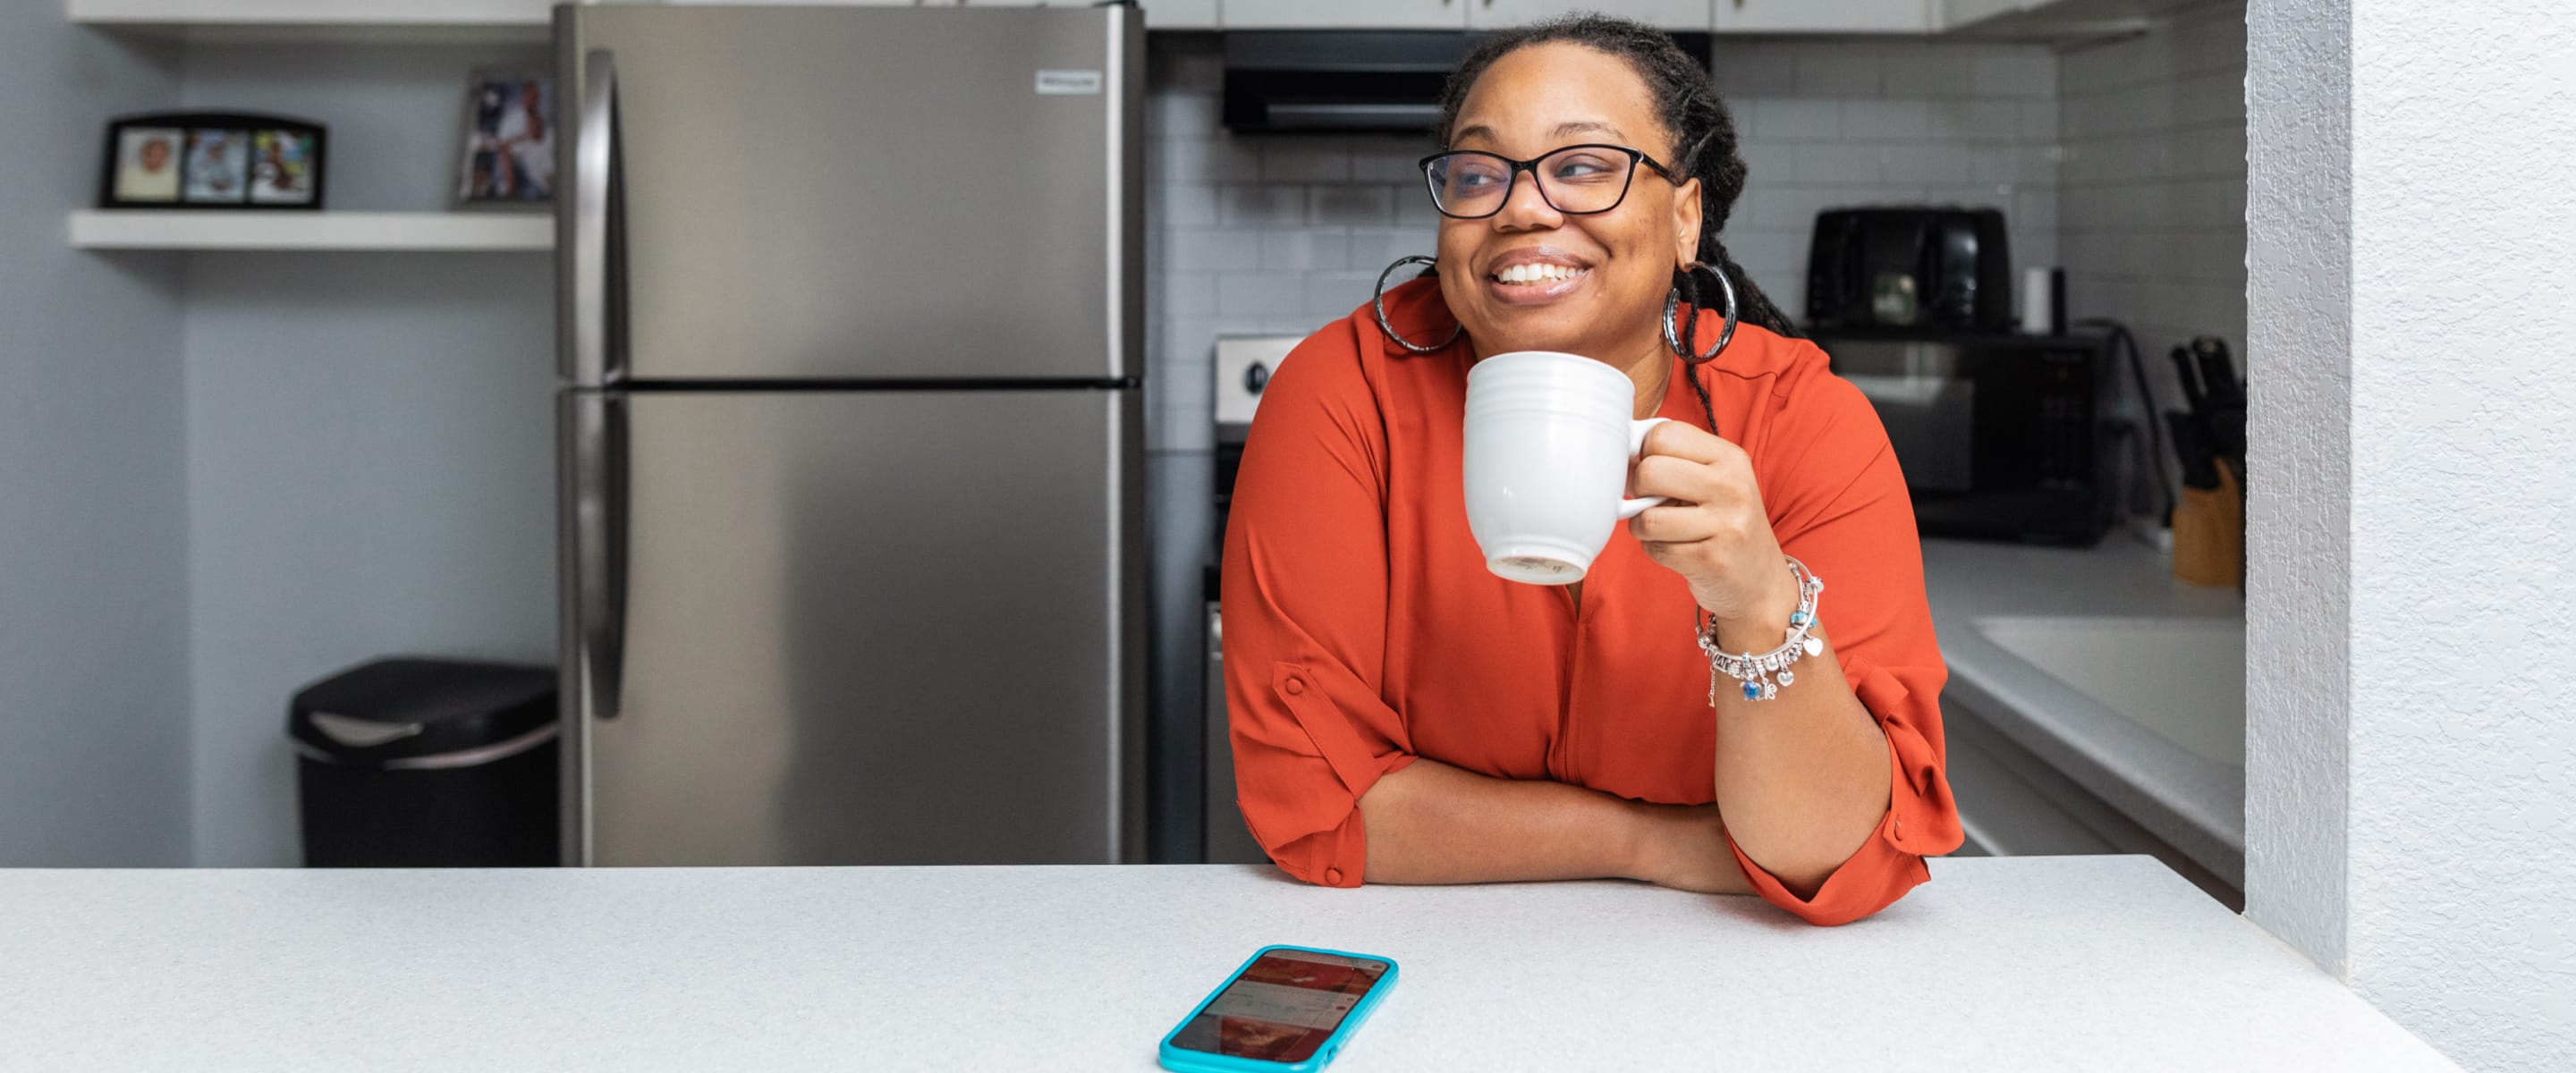 A woman in an orange outfit holding a white mug smiling at a kitchen countertop with a fridge behind her